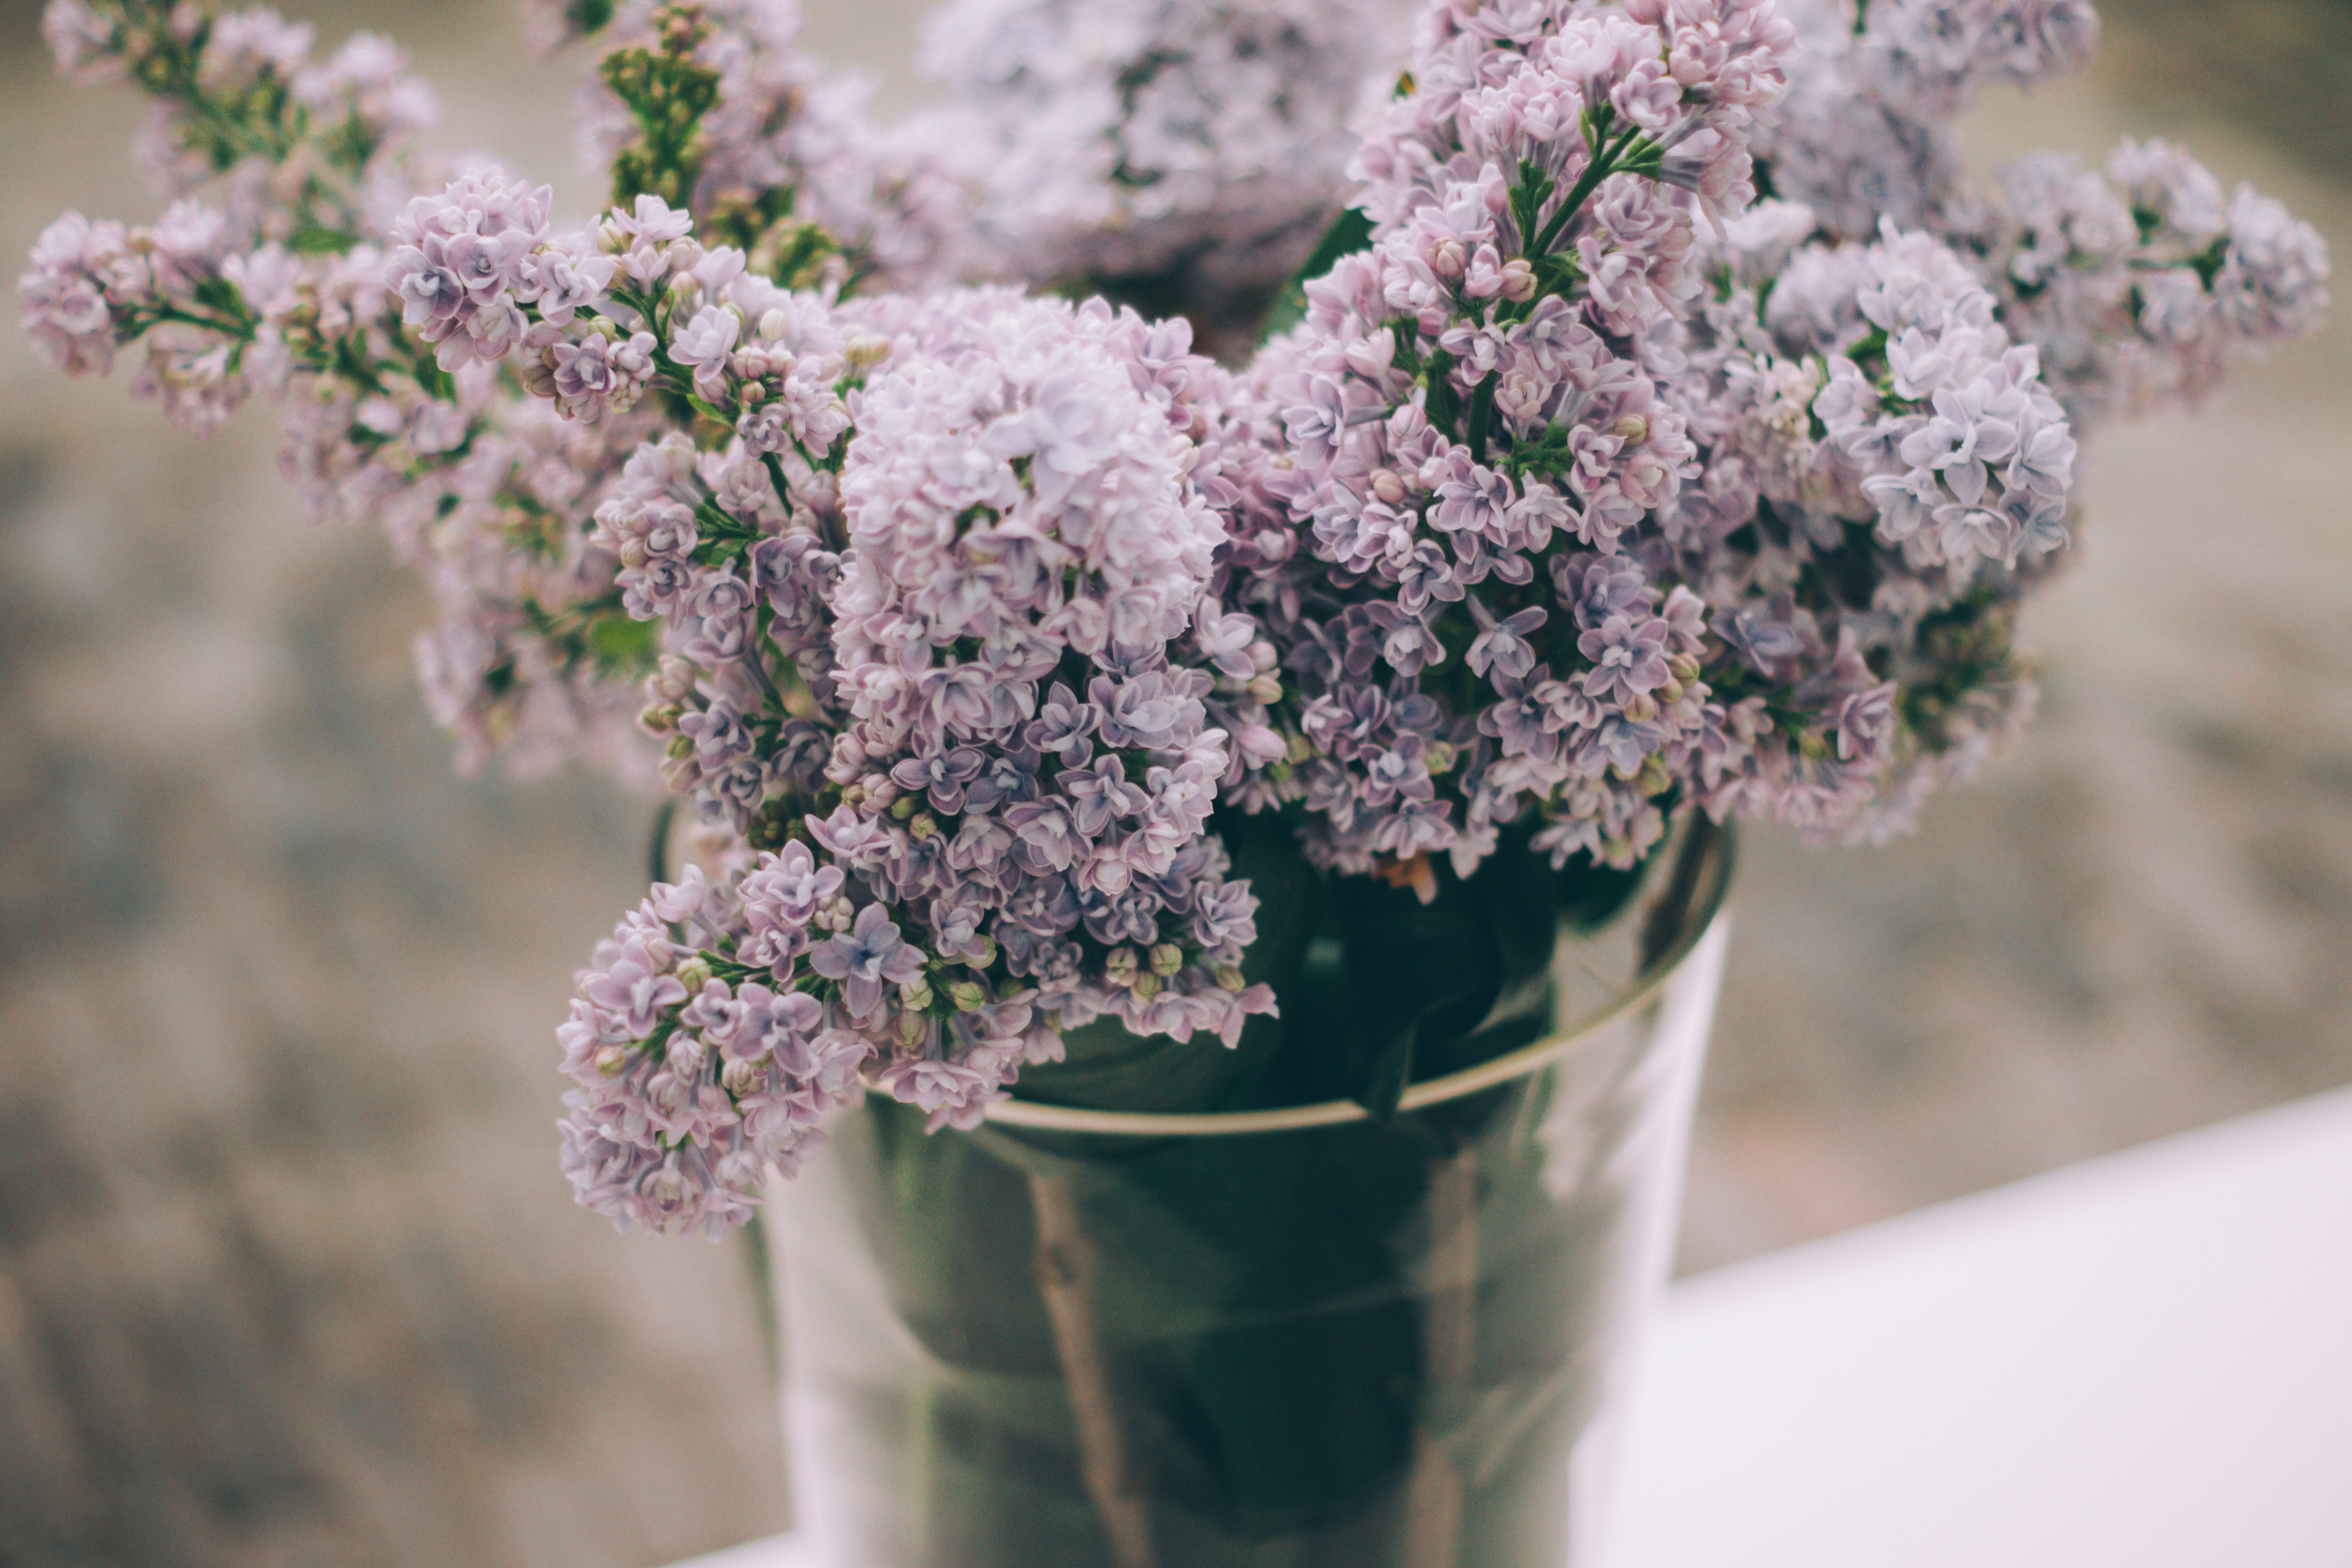 Choose from a curated selection of flower photos. Always free on Unsplash.